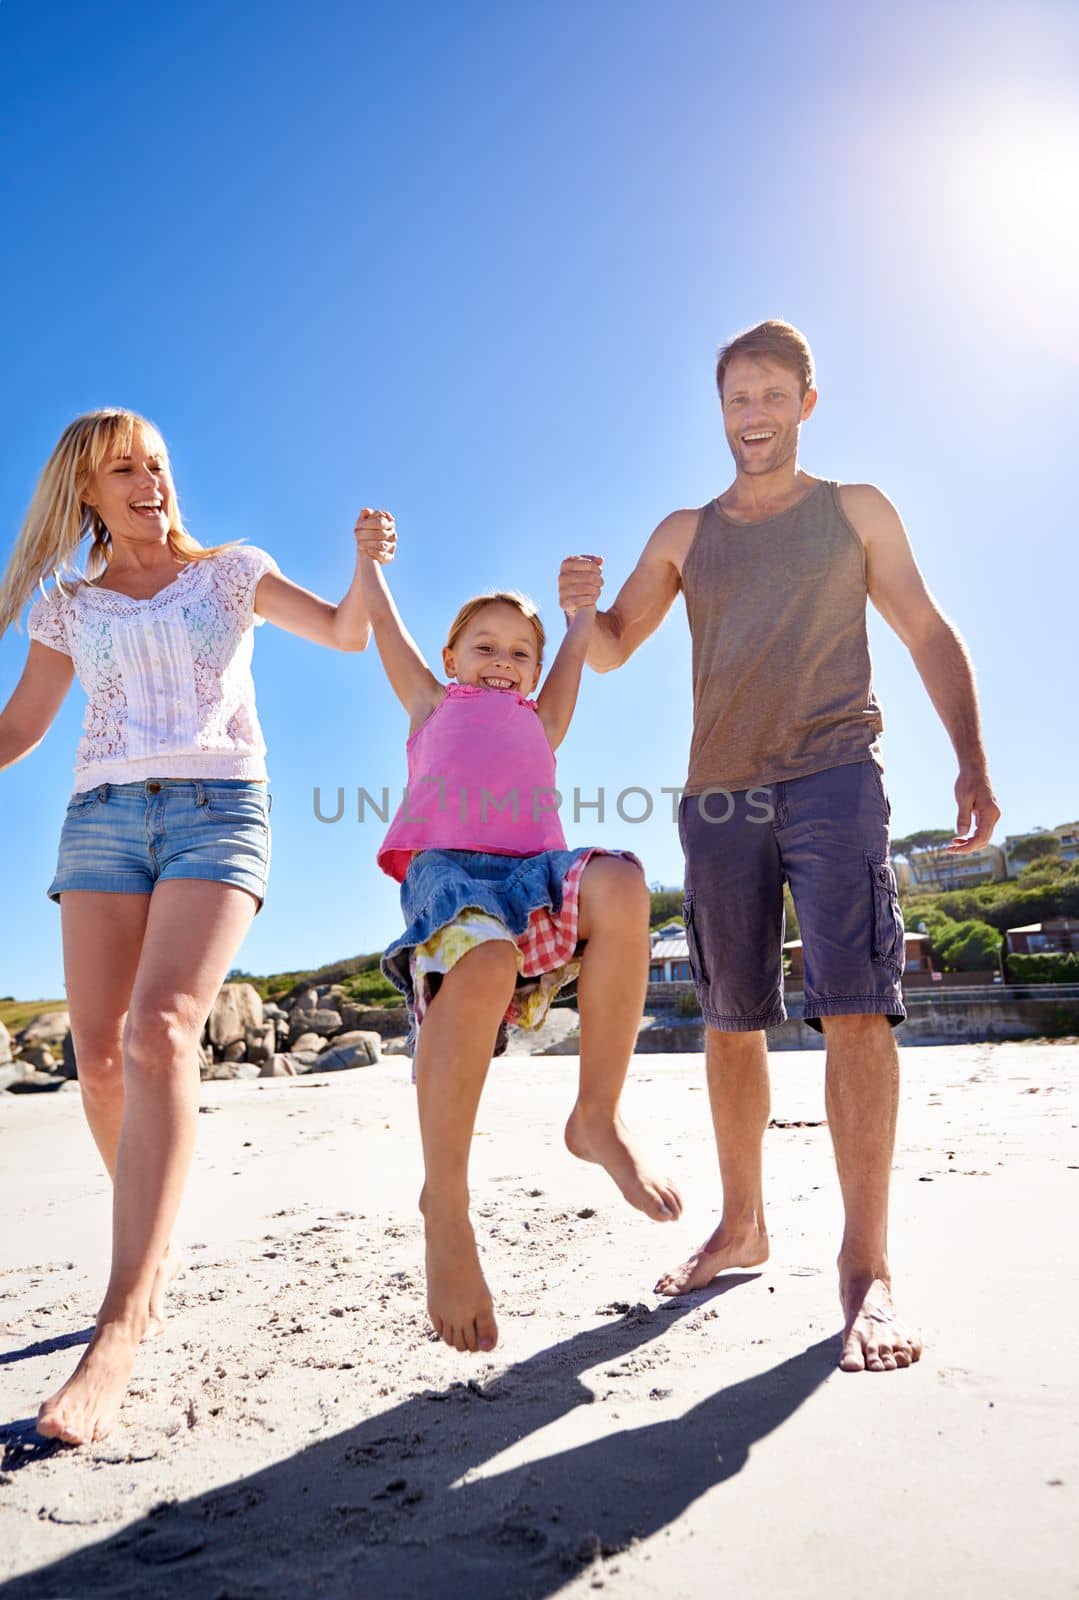 The beach is a great place for family bonding. a happy young family enjoying a walk on the beach